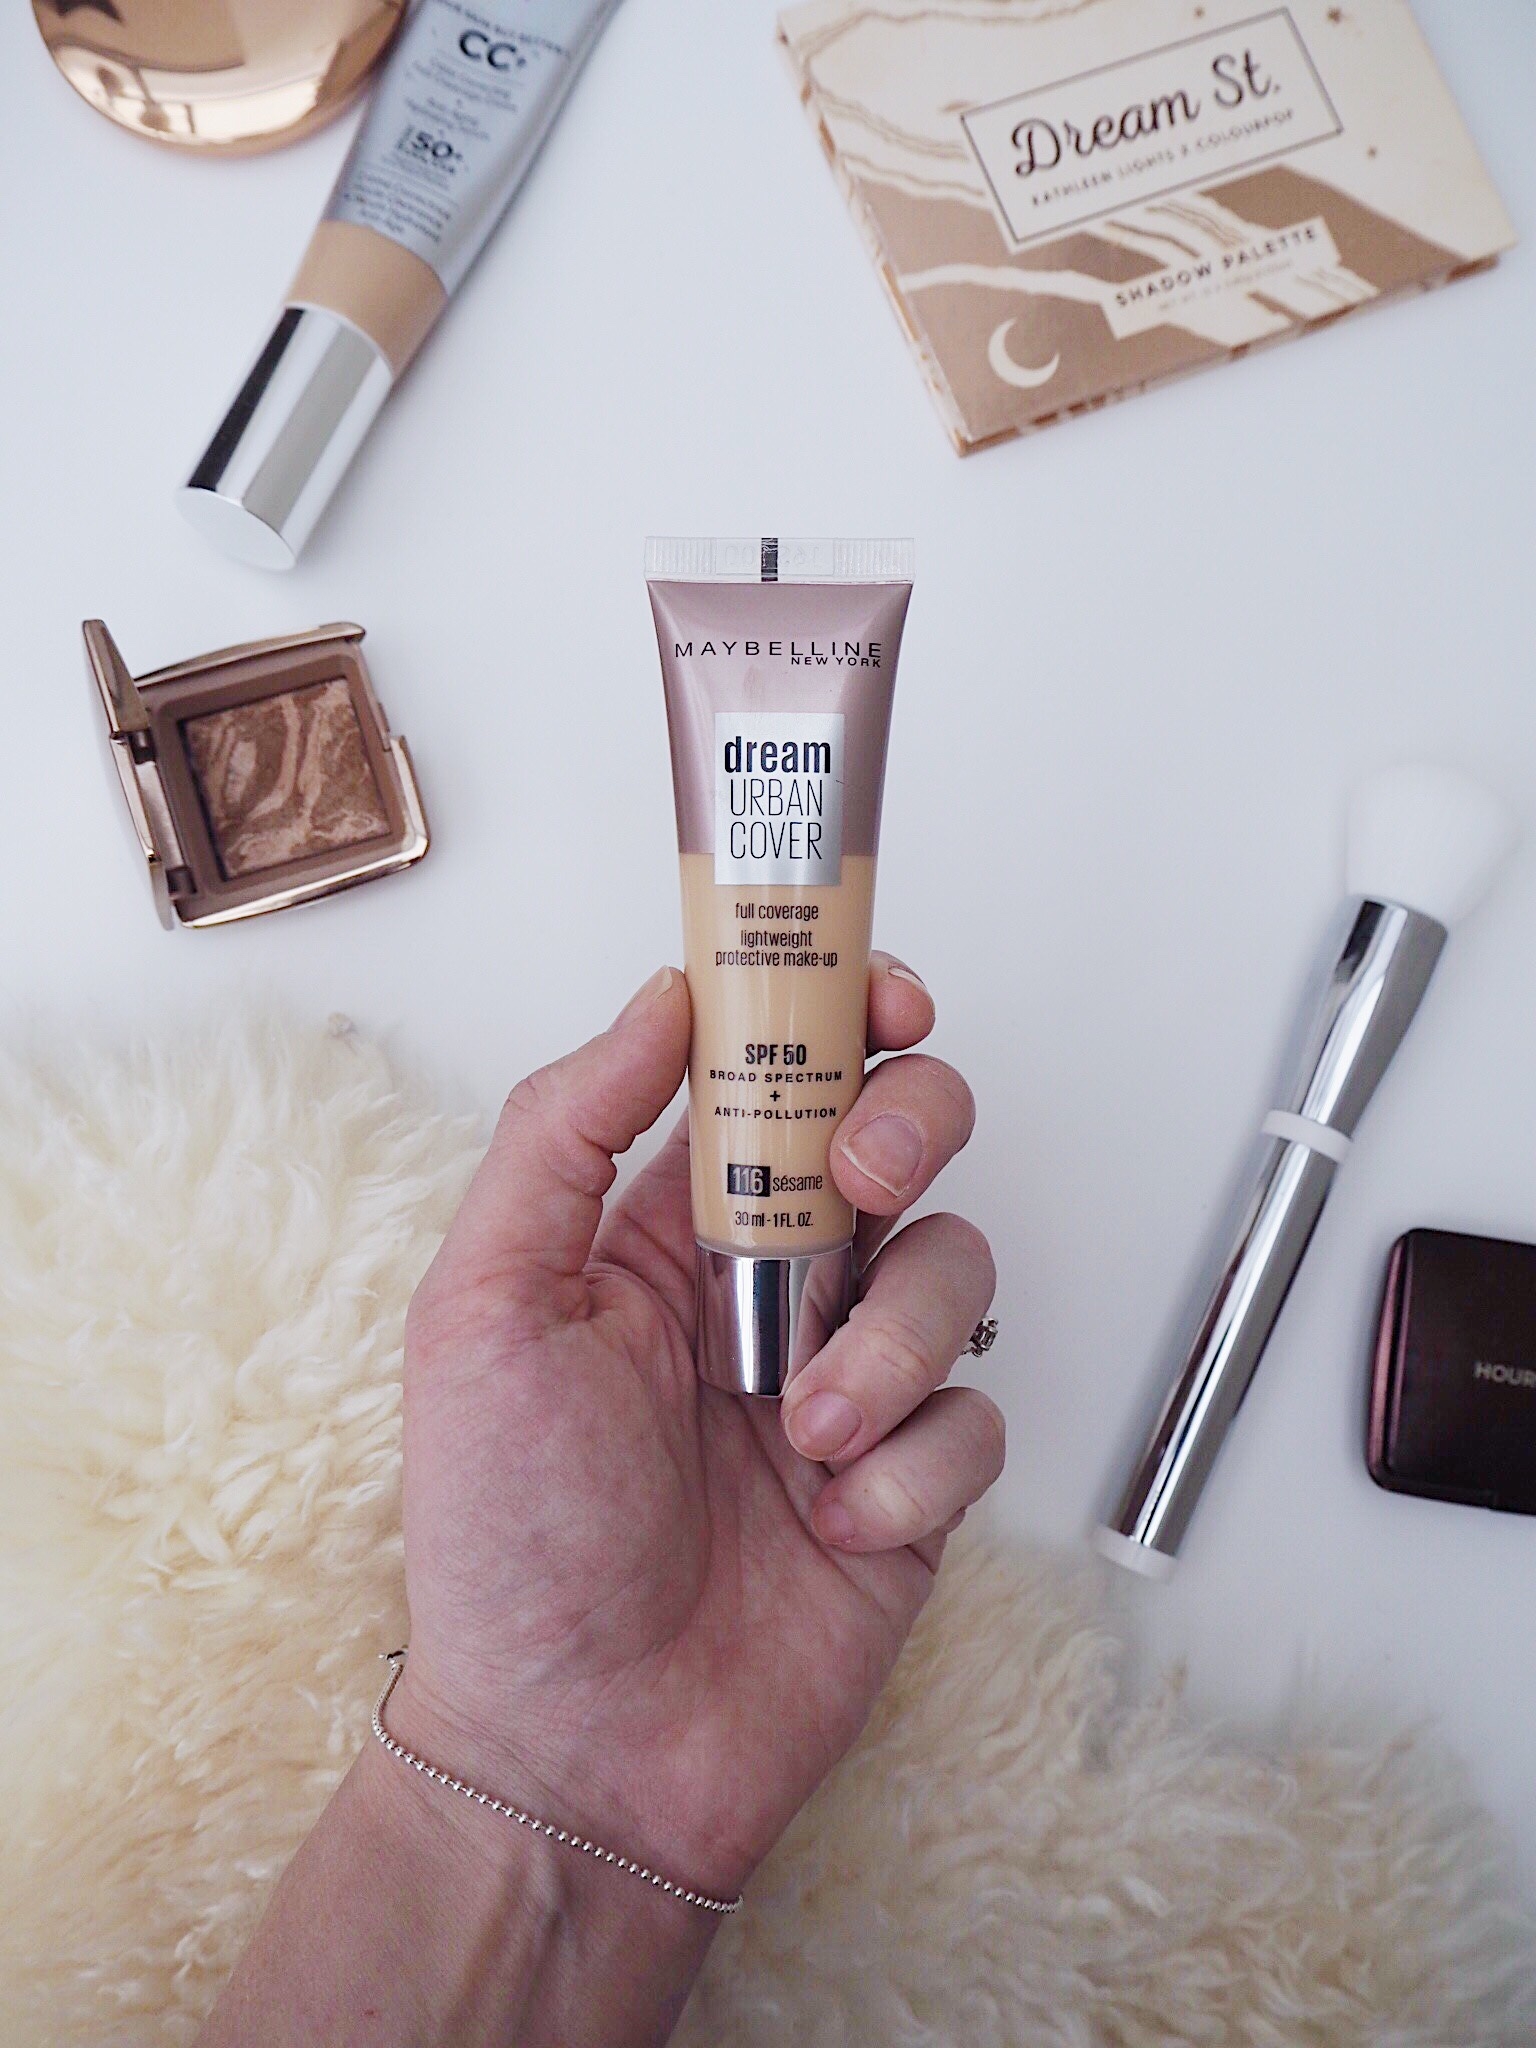 How is Maybelline foundation 